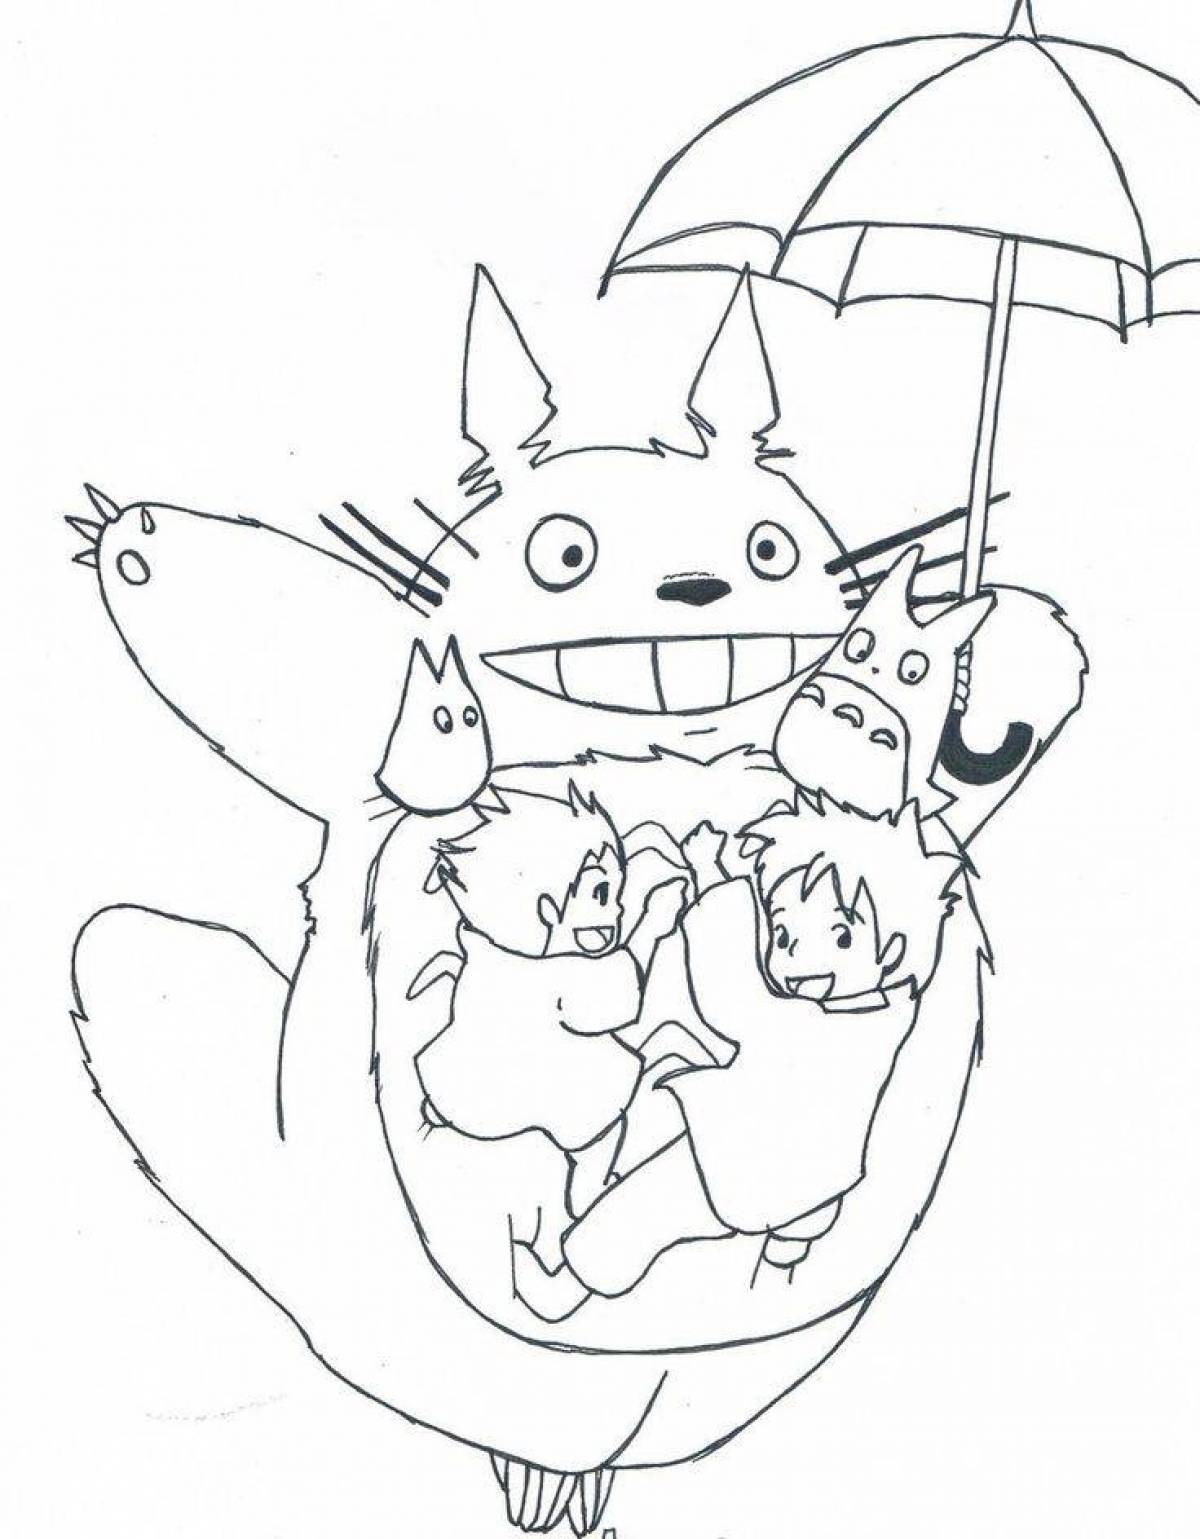 Awesome totoro coloring page